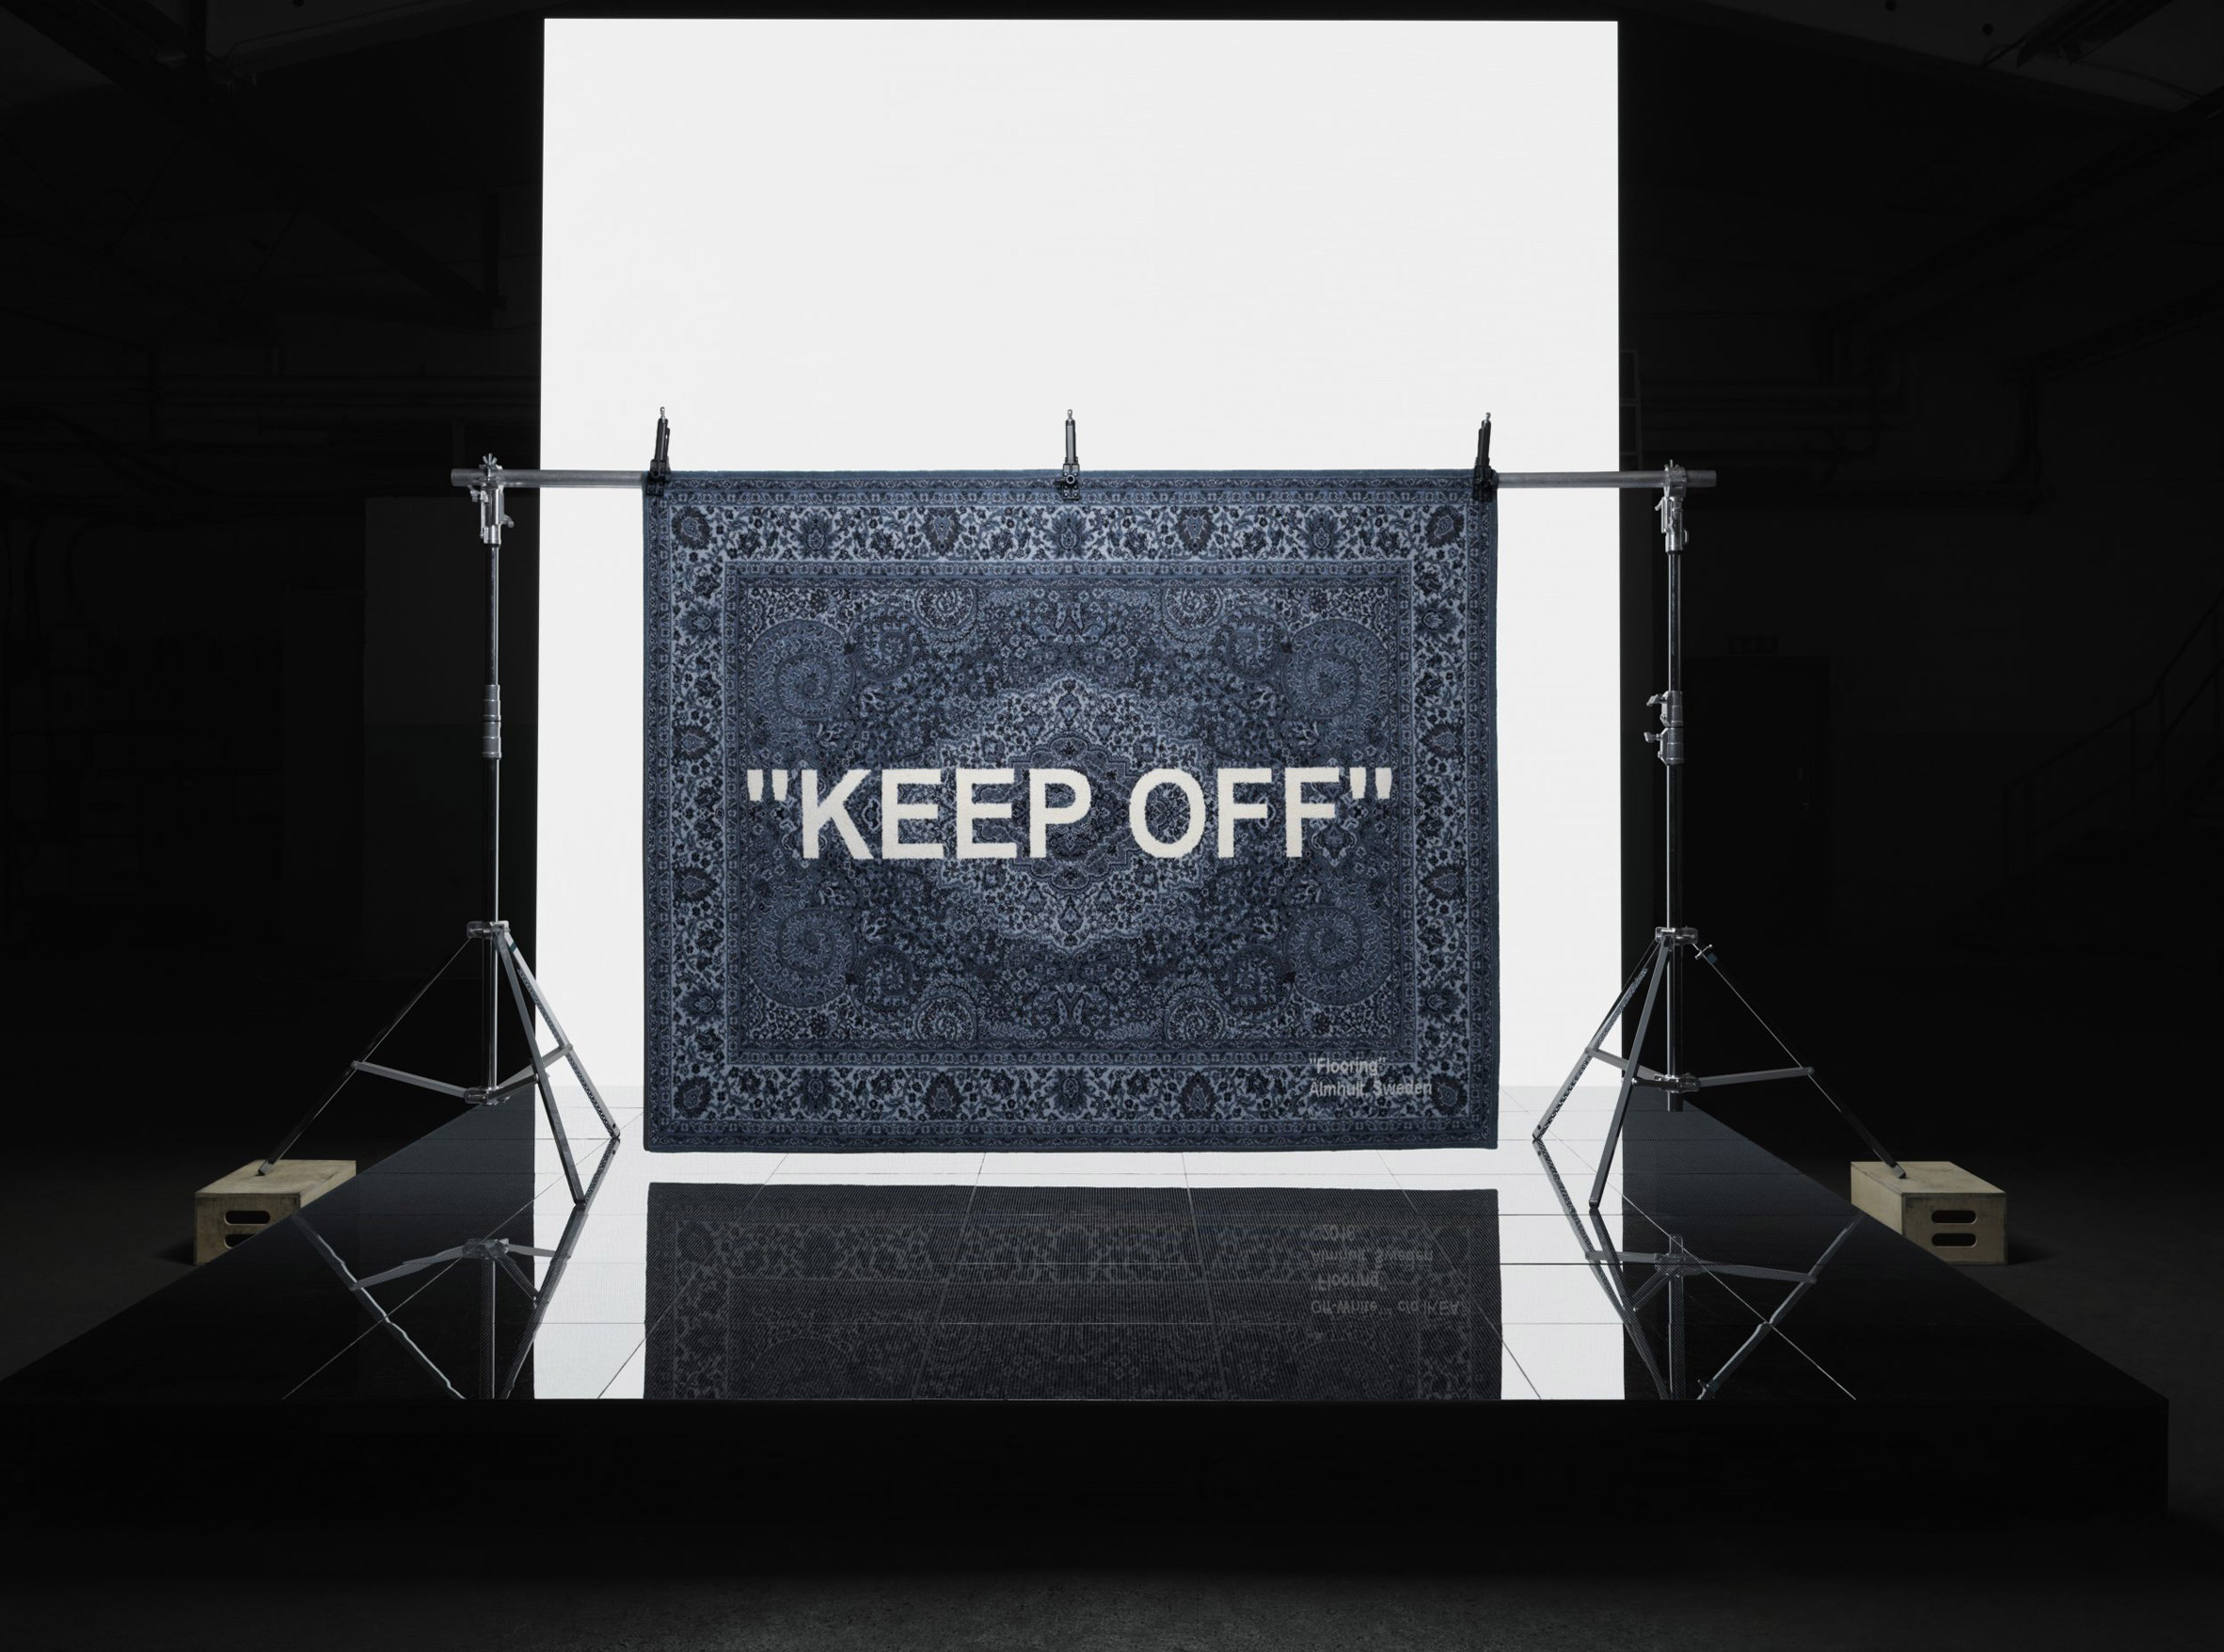 Virgil Abloh and Craig Green among designers of IKEA's collection of rugs